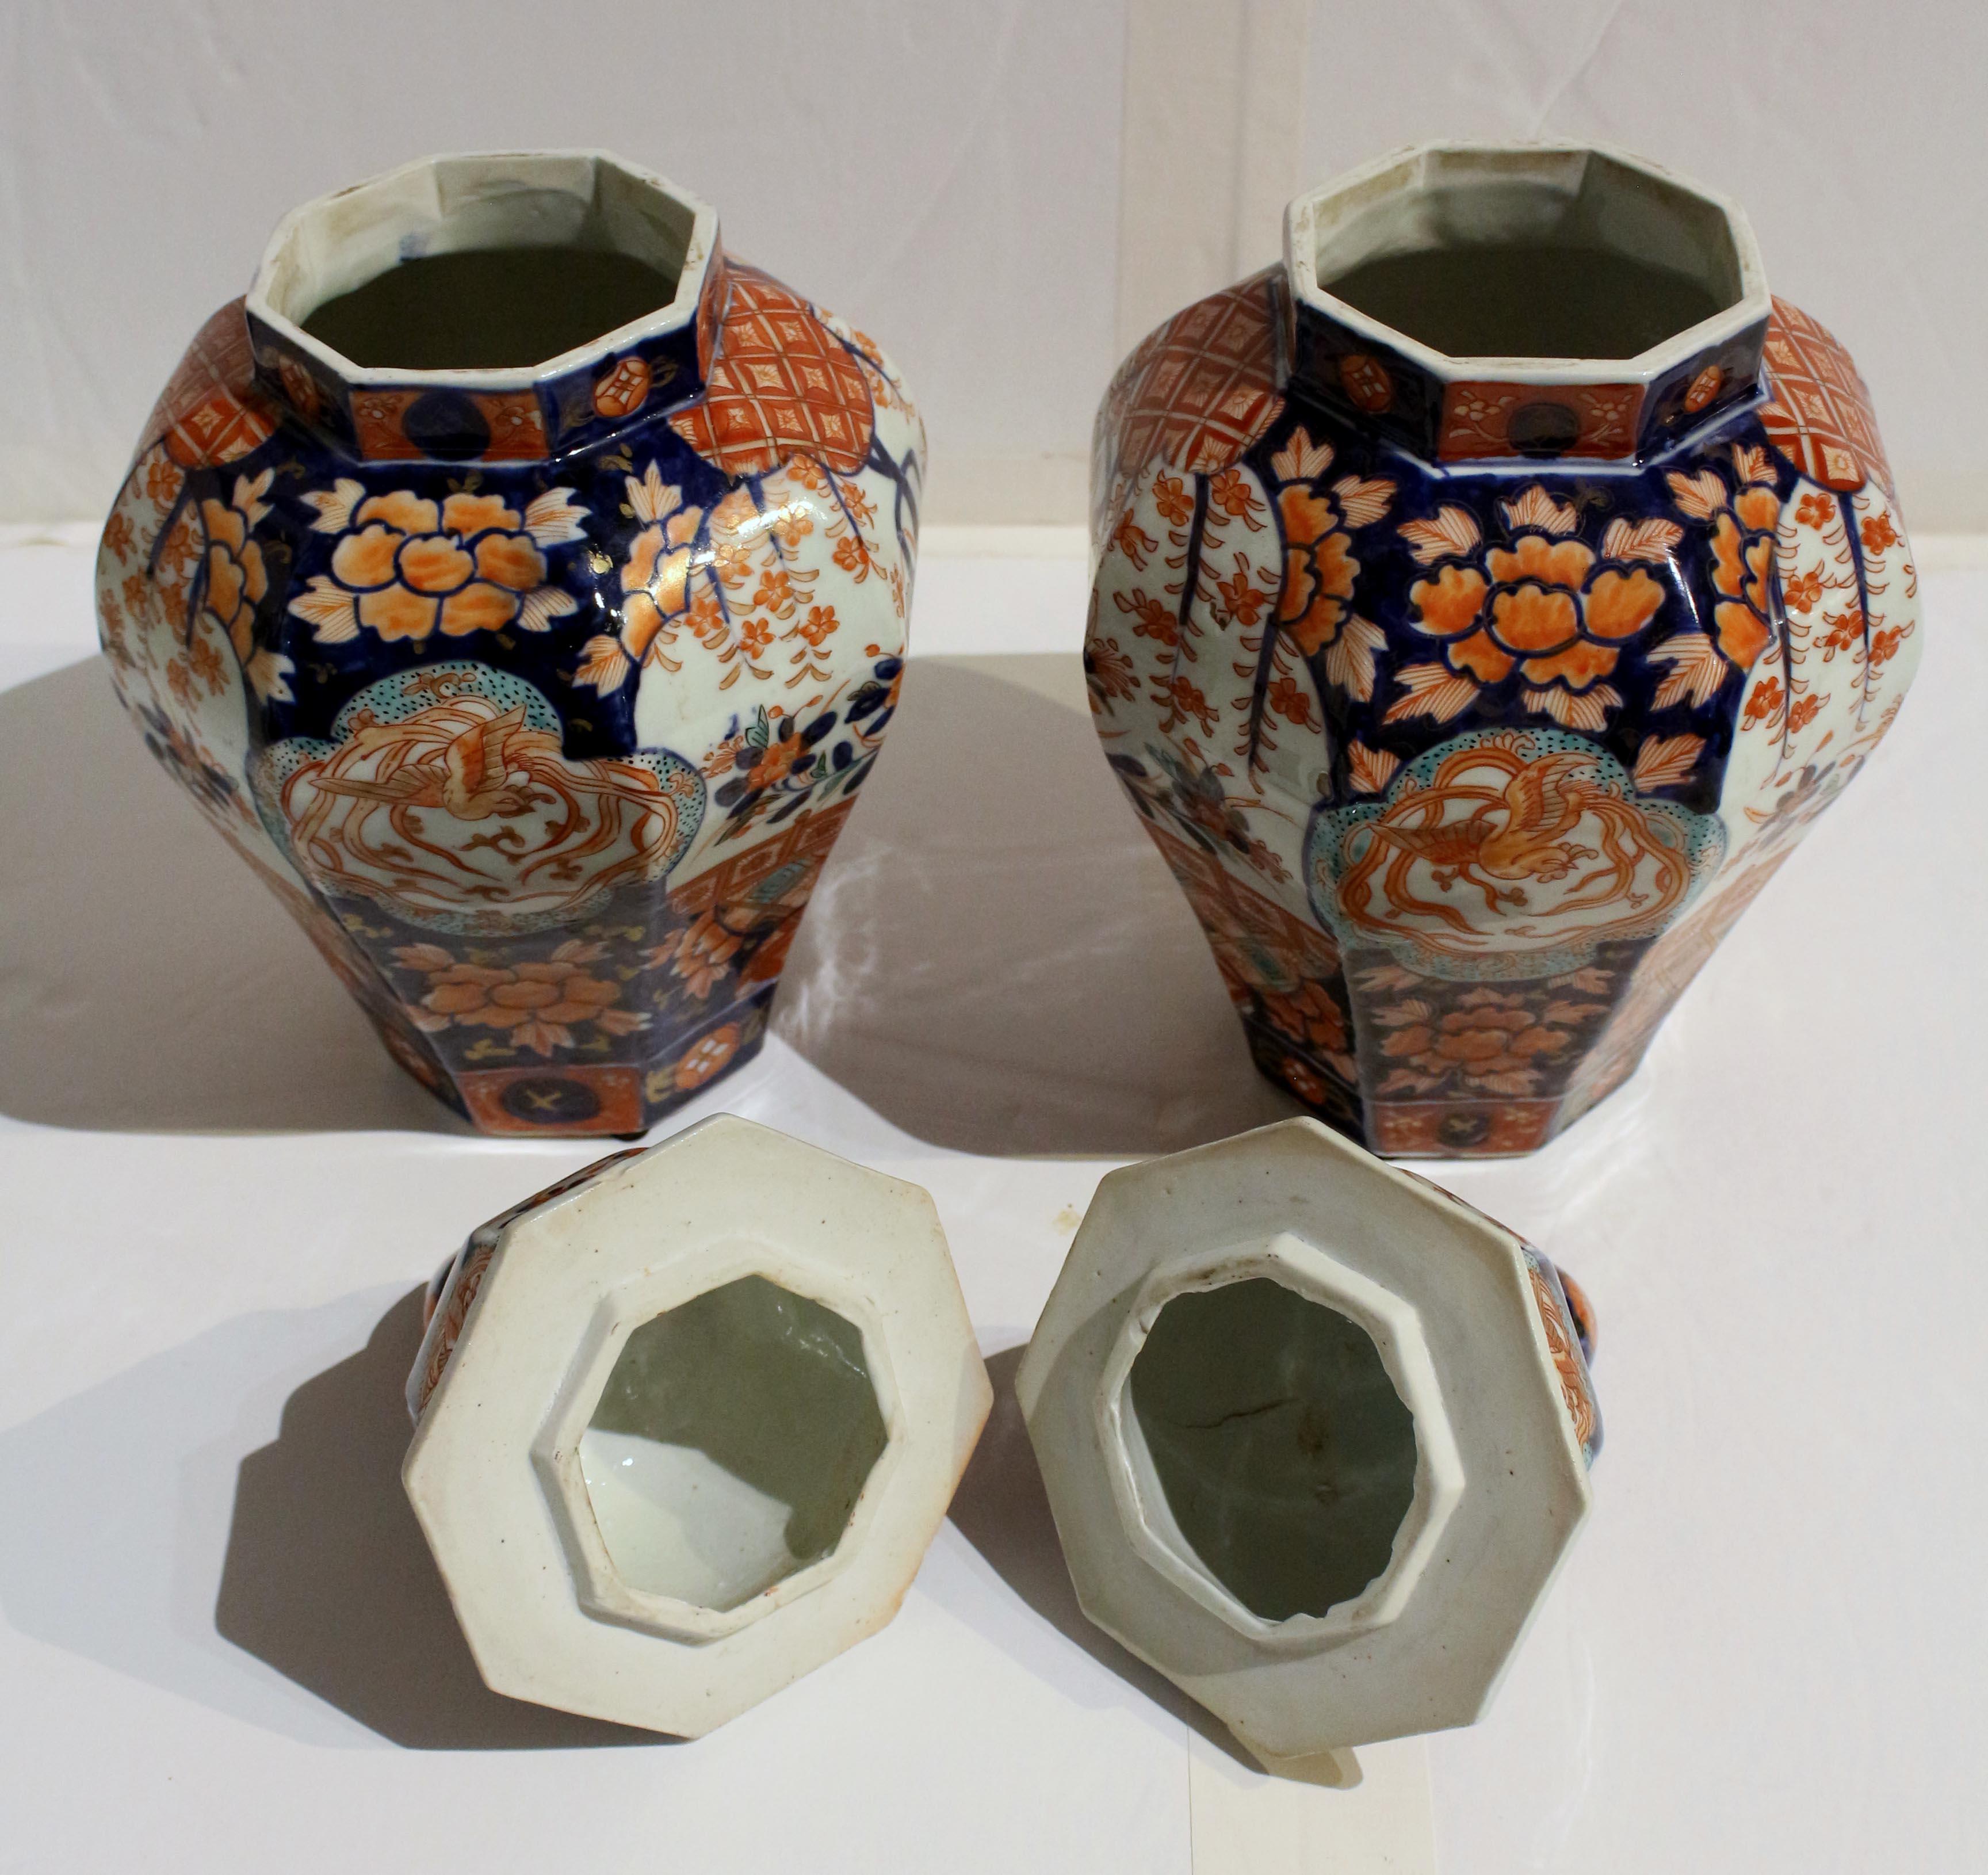 Circa 1860-80 Pair of Japanese Imari Covered Jars In Good Condition For Sale In Chapel Hill, NC